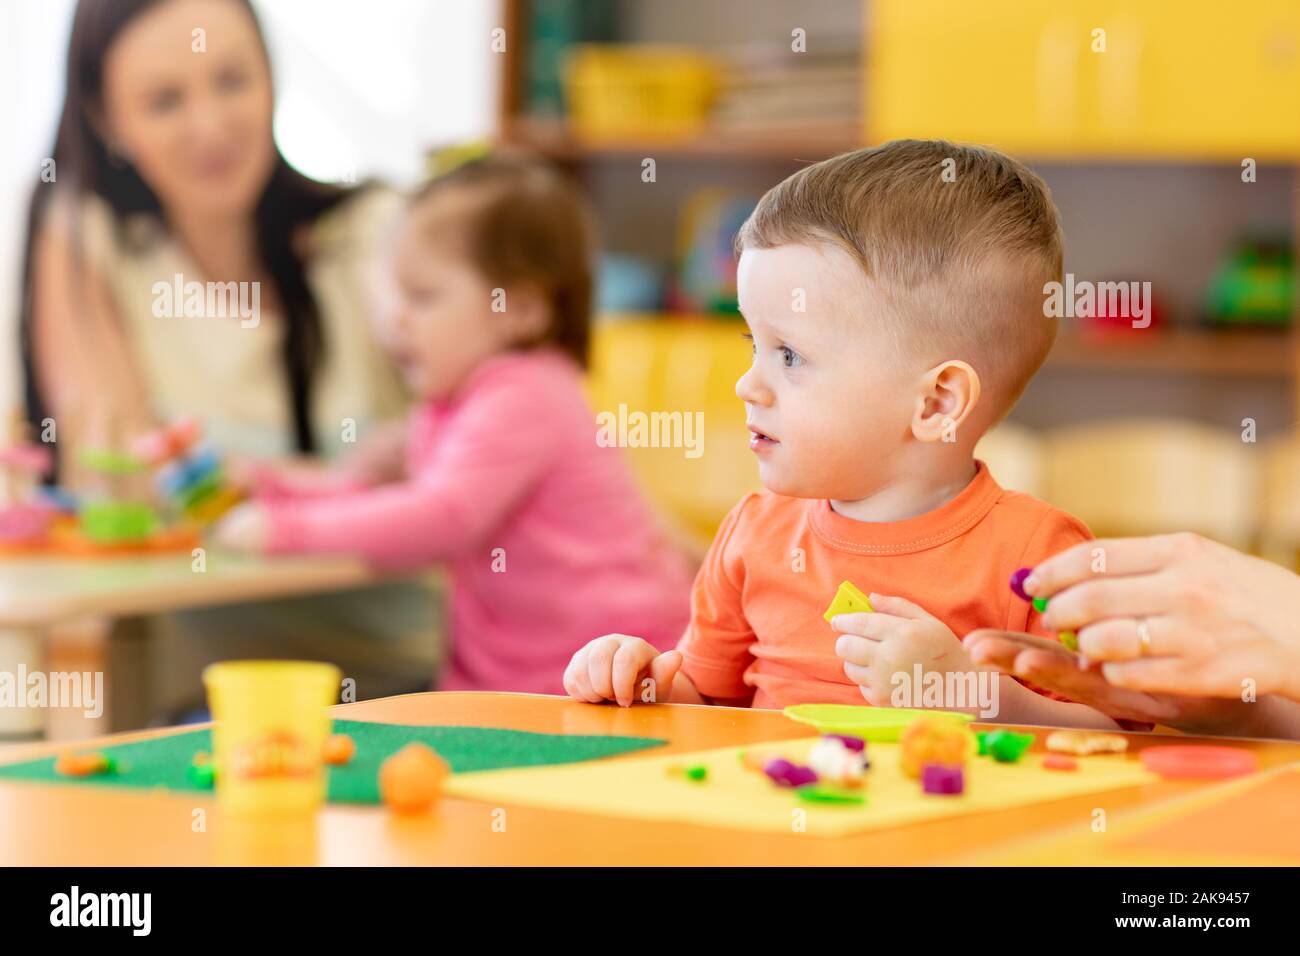 kids toddlers playing with play clay at nursery or kindergarten or daycare Stock Photo